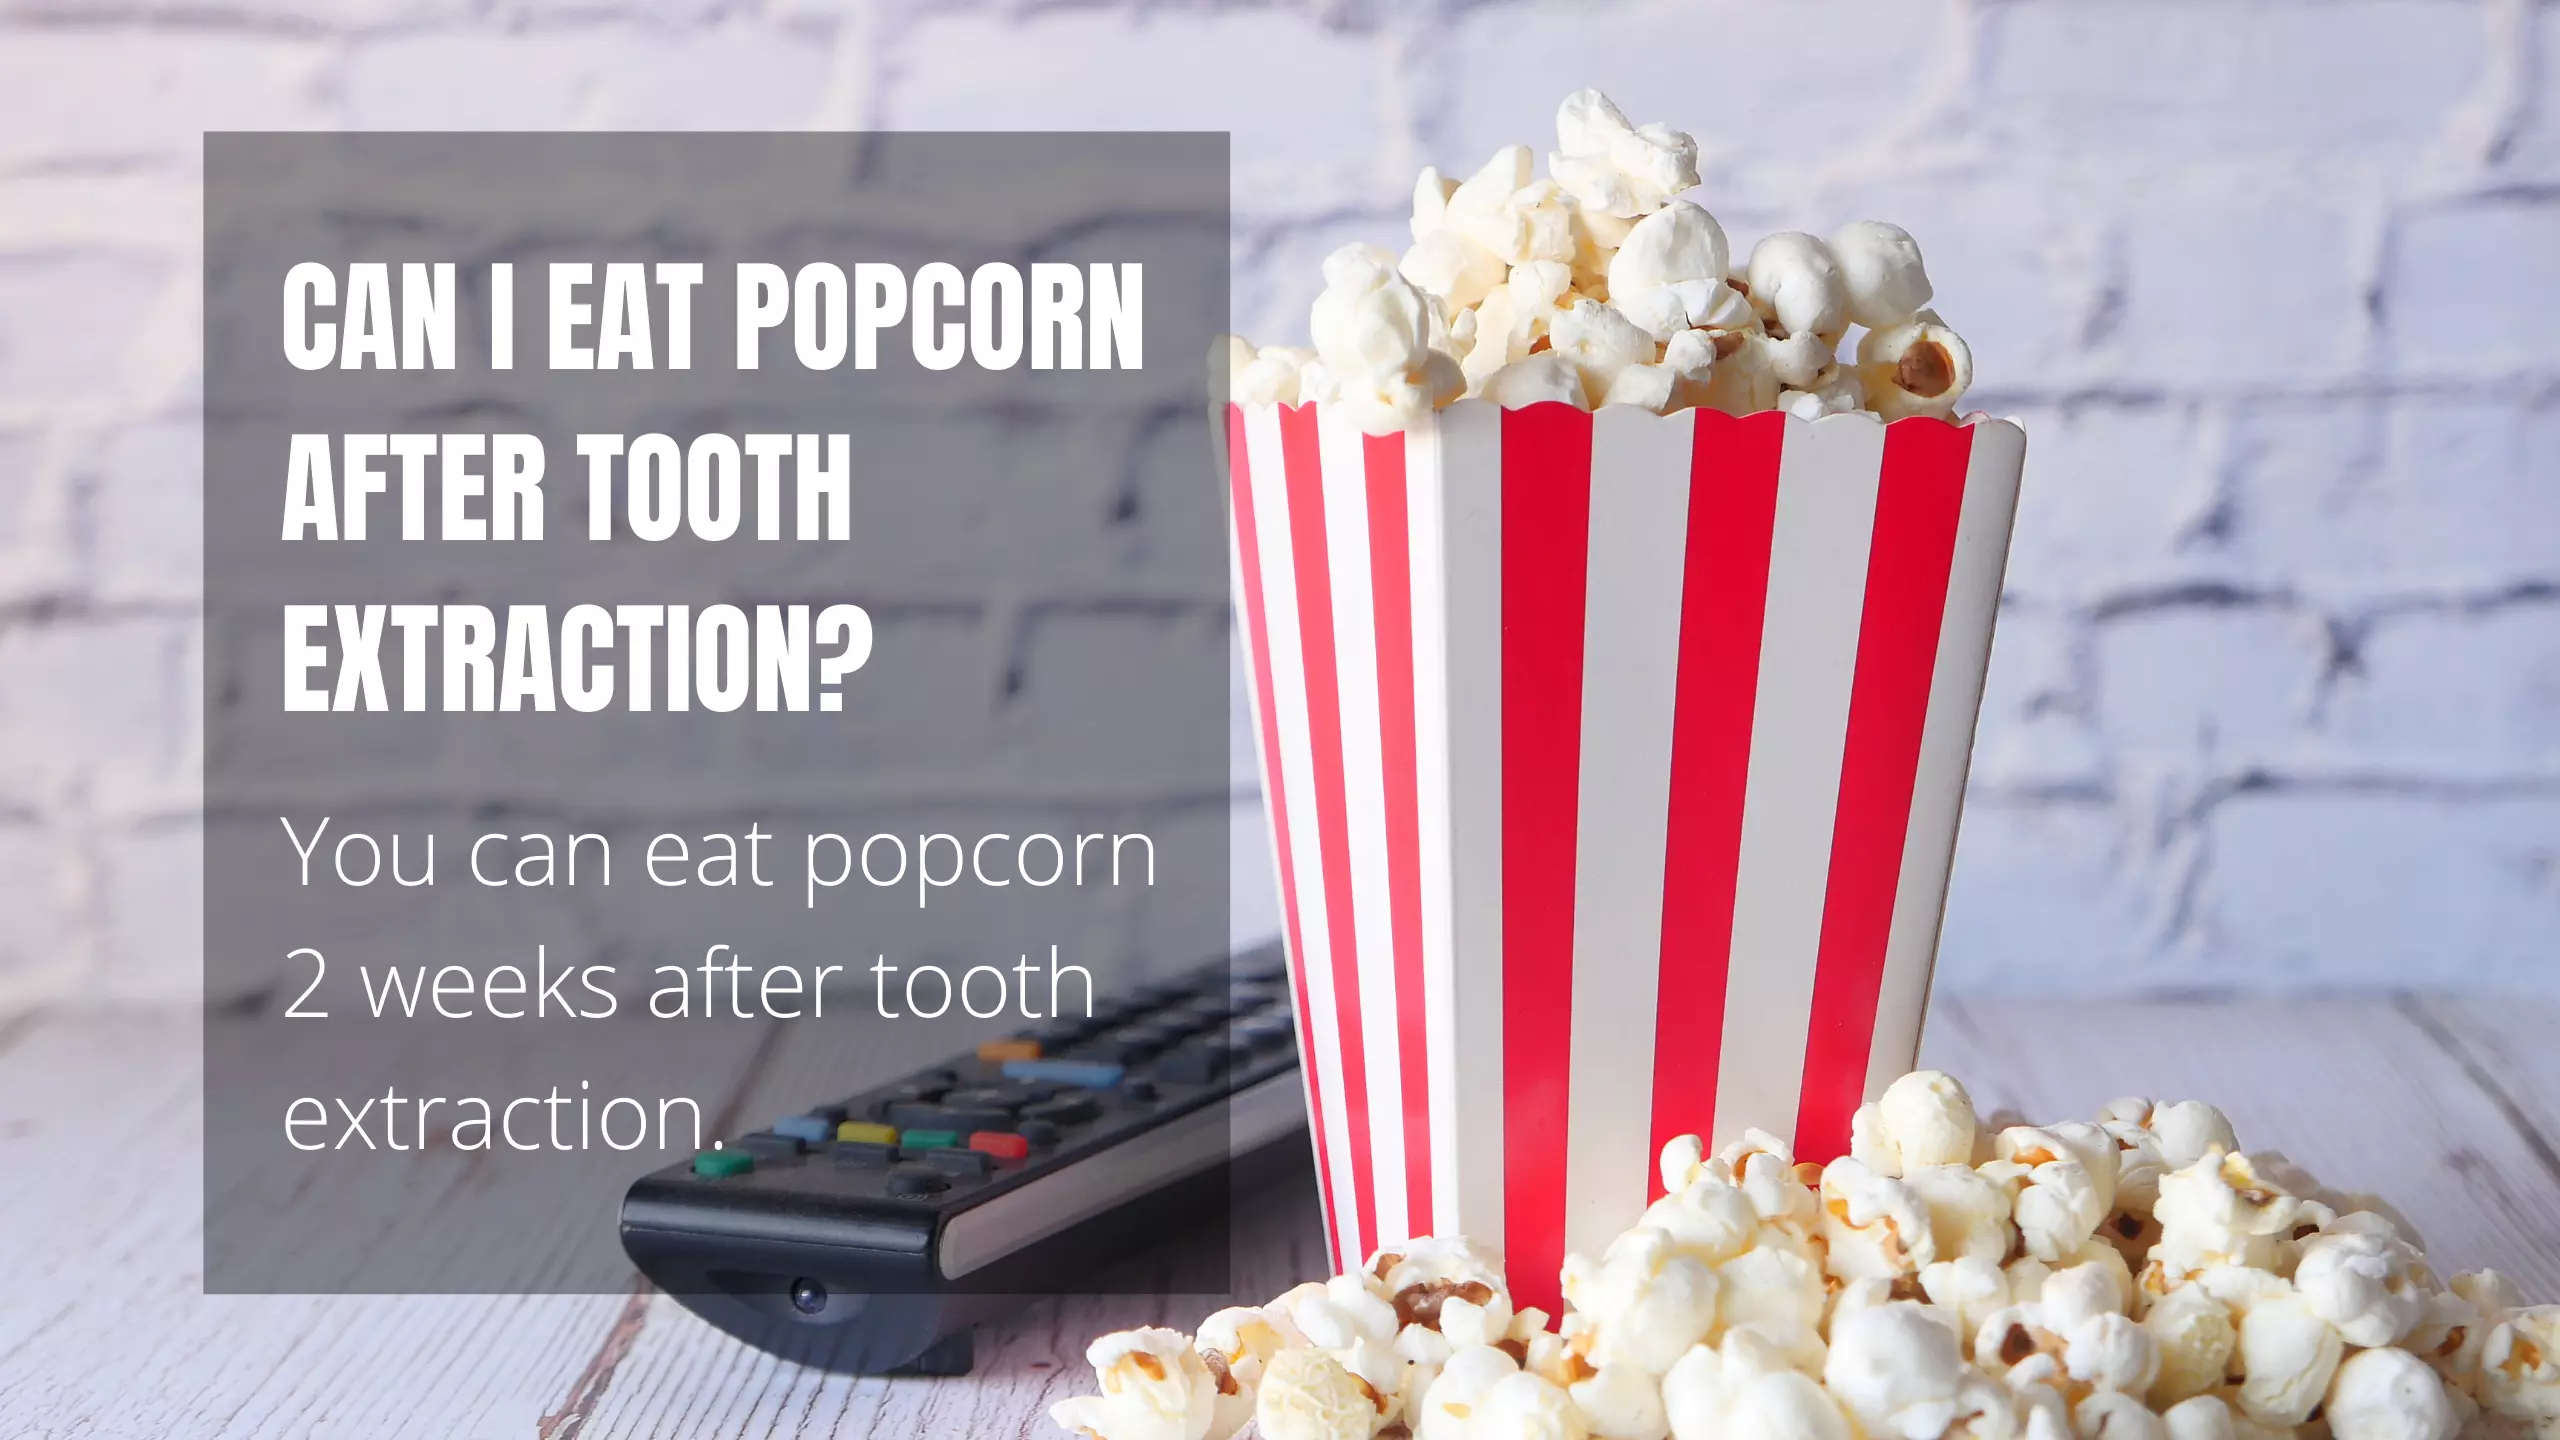 Can I Eat Popcorn After Tooth Extraction